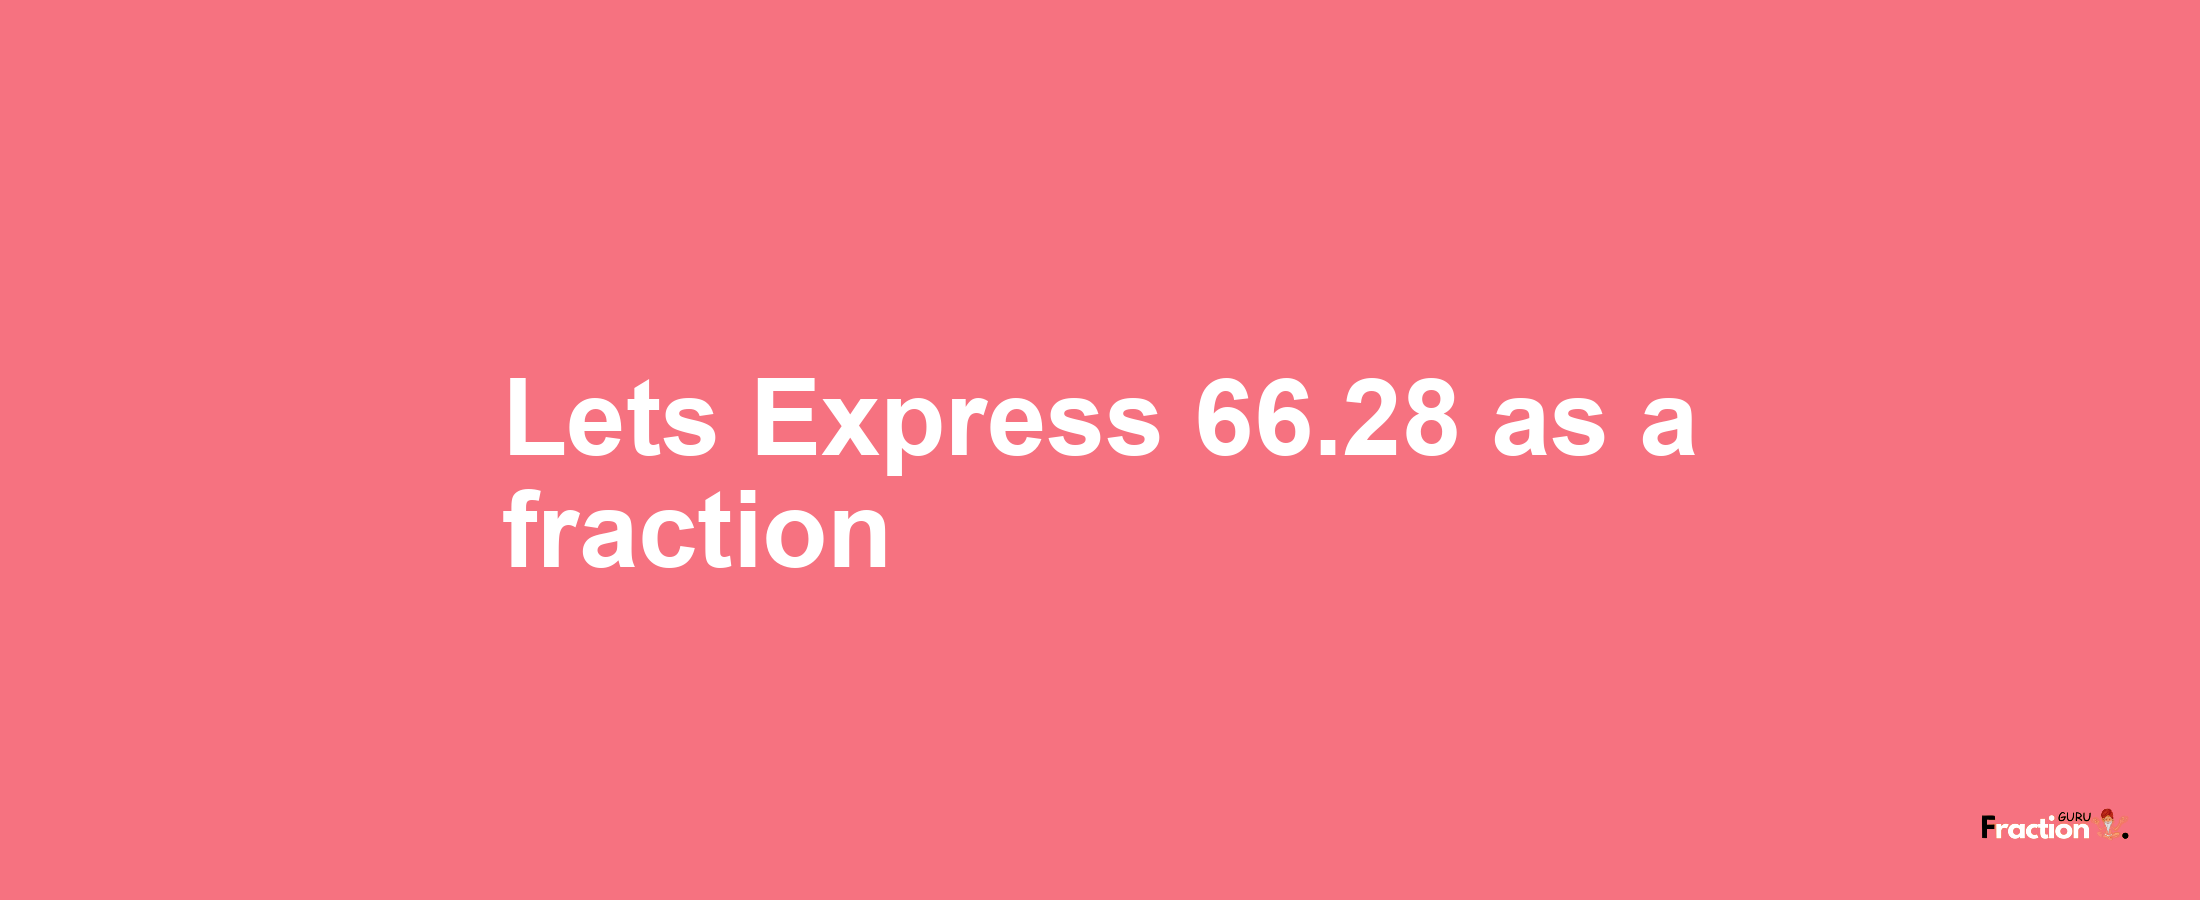 Lets Express 66.28 as afraction